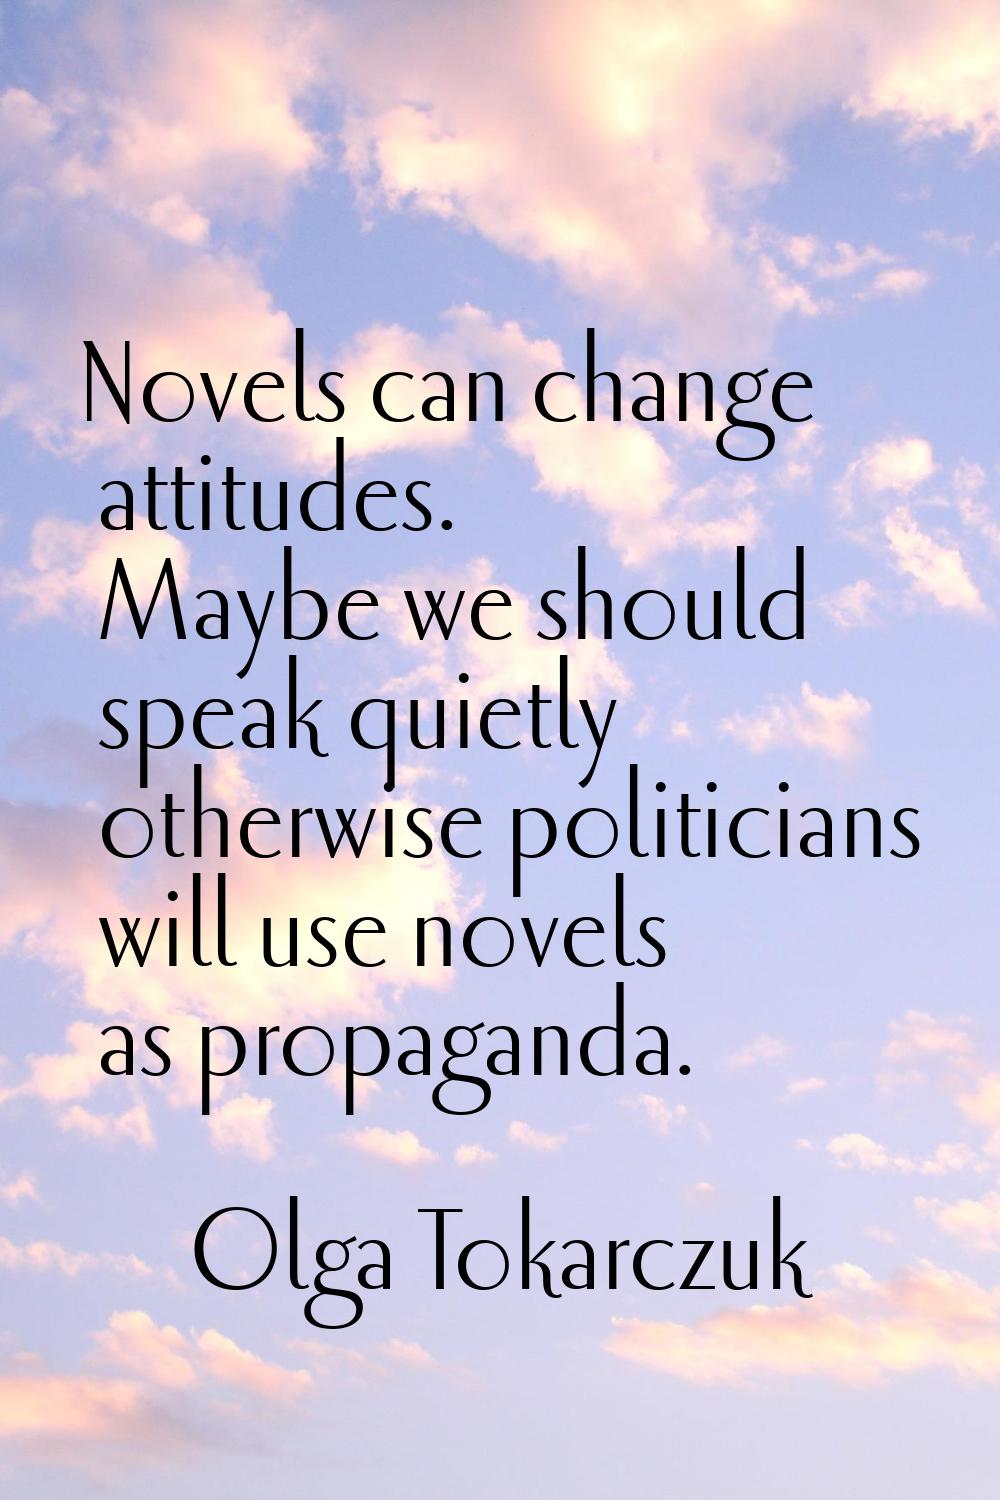 Novels can change attitudes. Maybe we should speak quietly otherwise politicians will use novels as